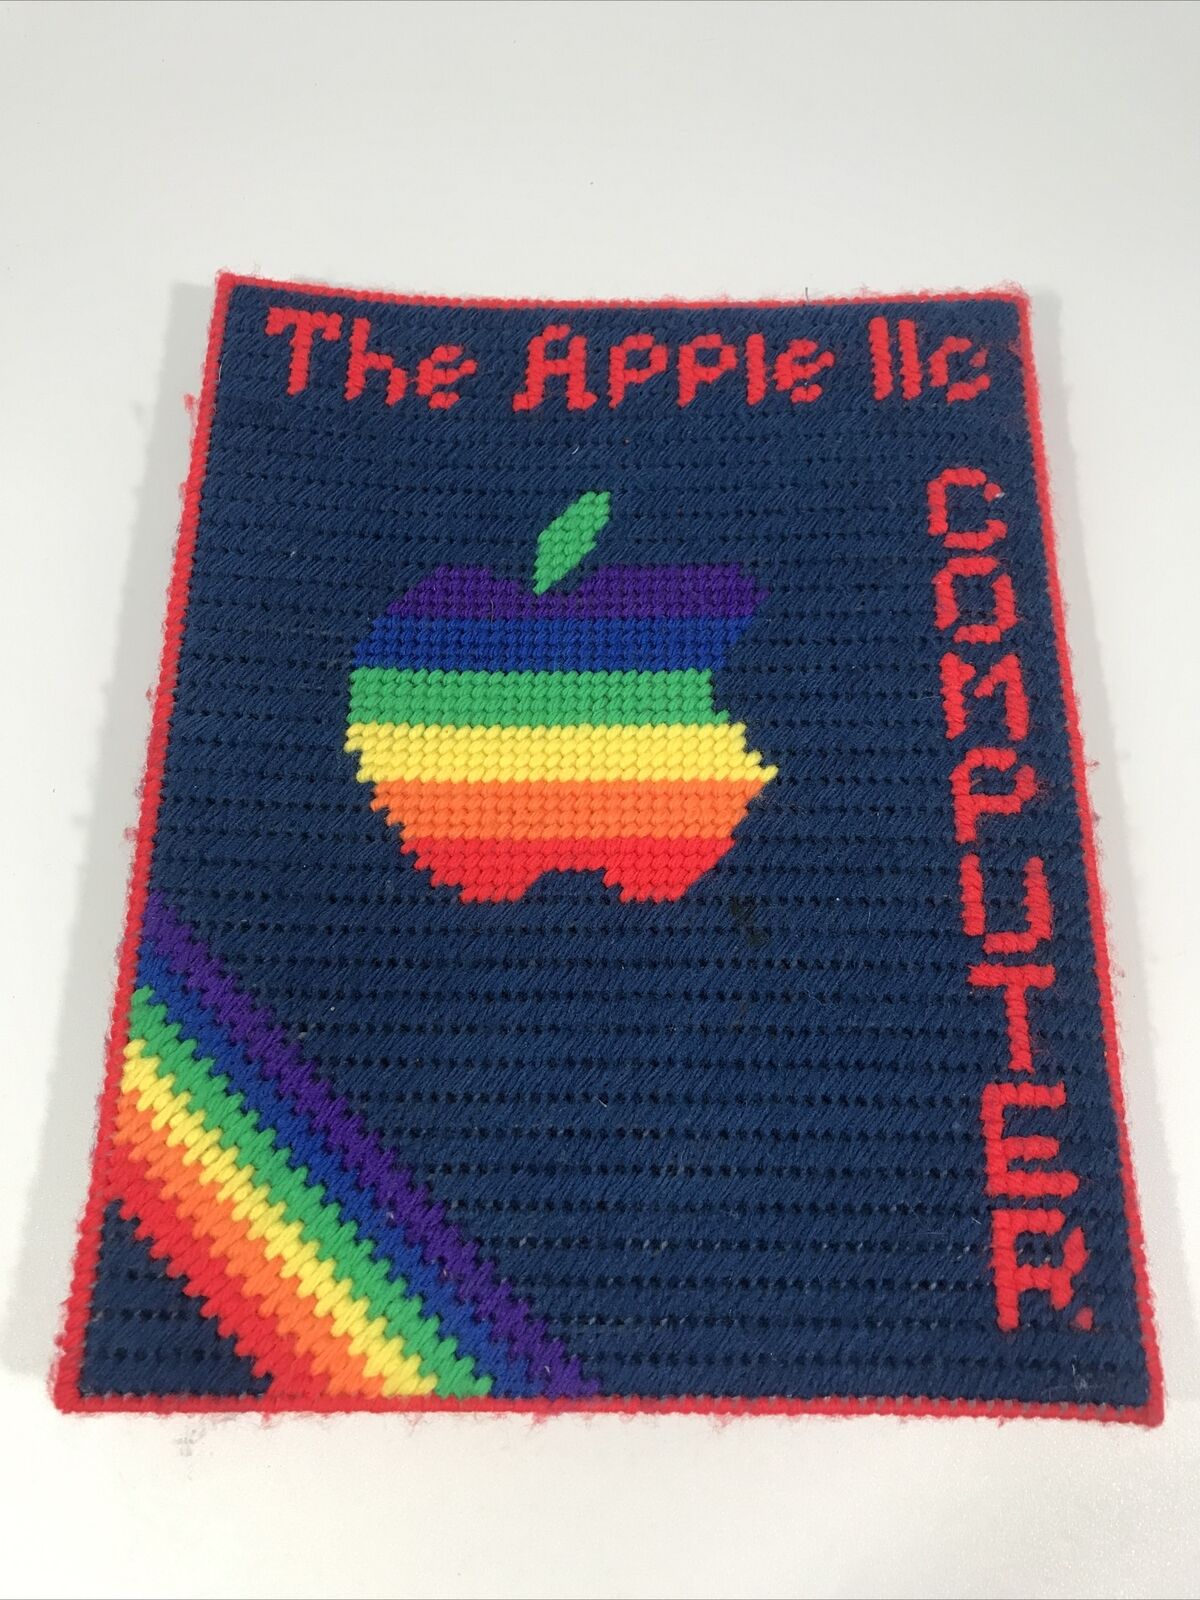 Vintage Handmade Plastic Canvas Apple IIc Computer Notebook Cover 8.5x11” Wow